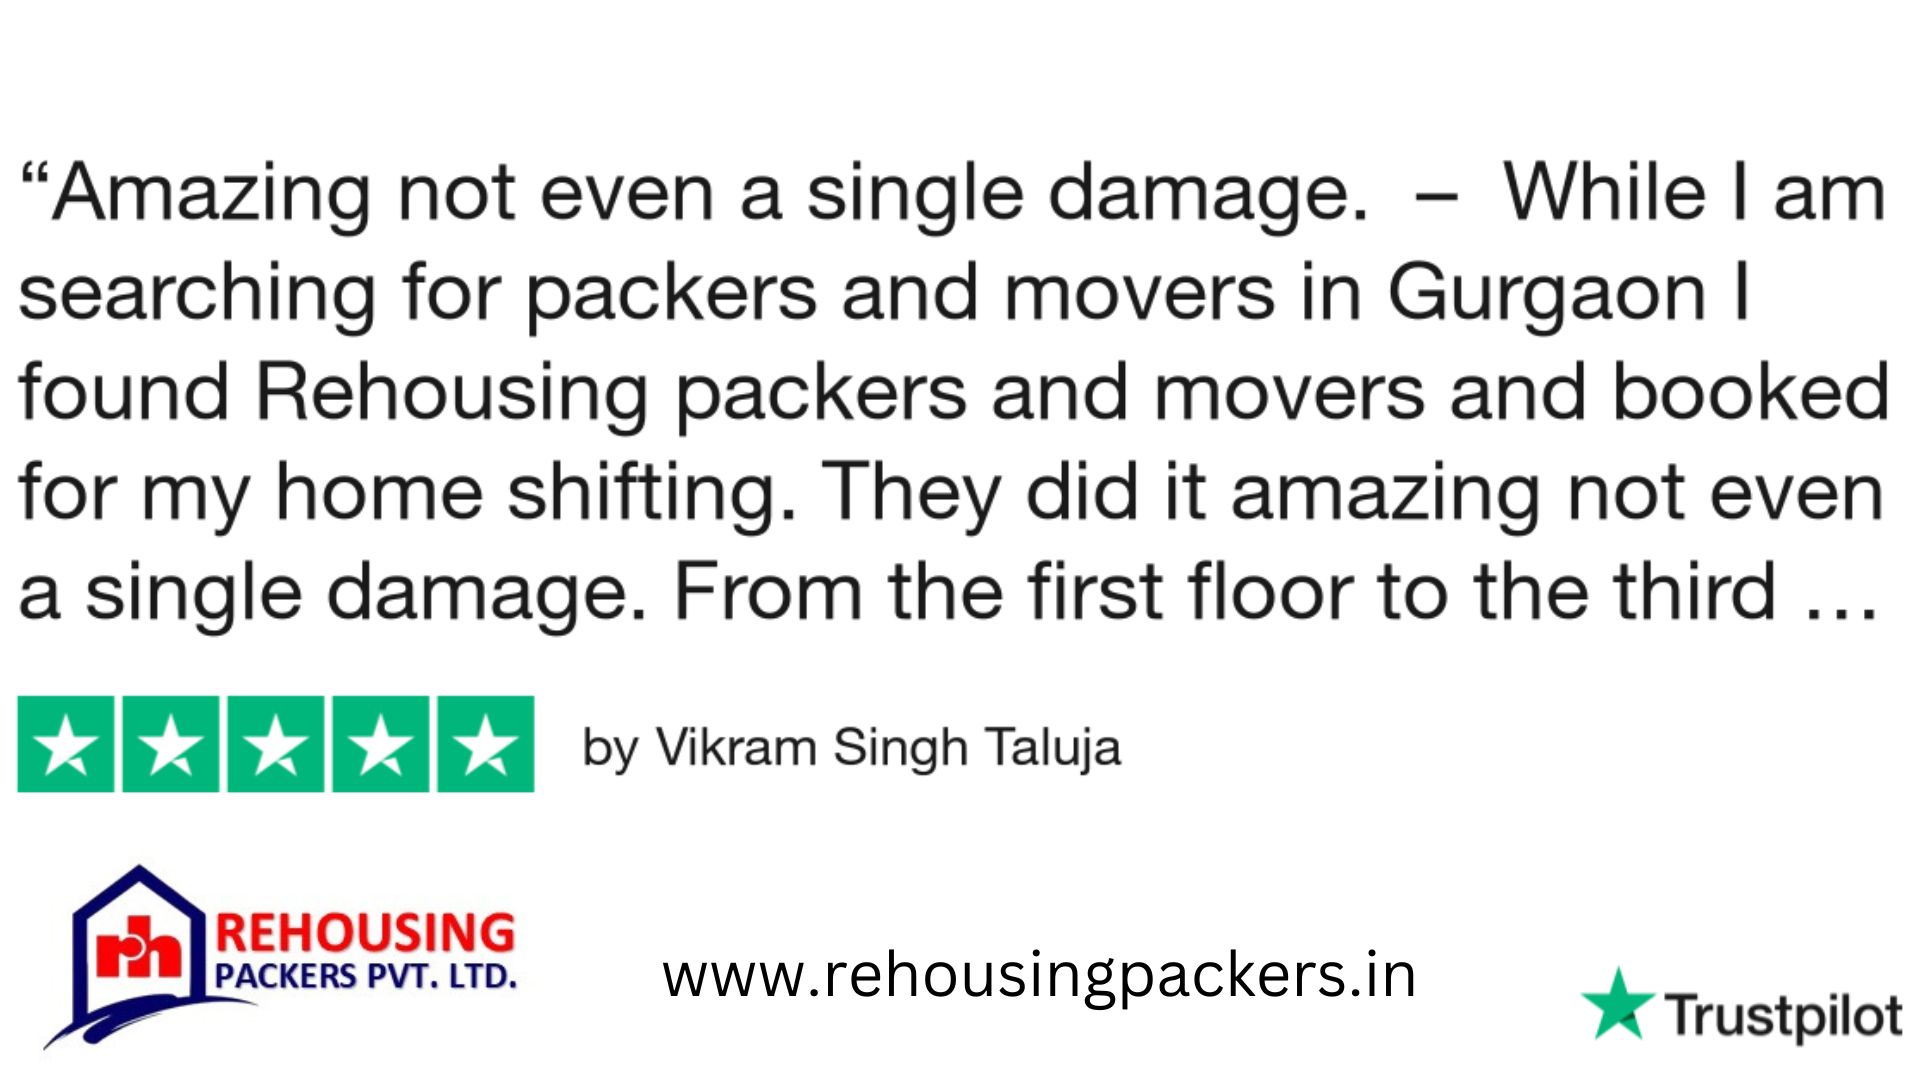 Rehousing packers and movers reviews trustpilot 12